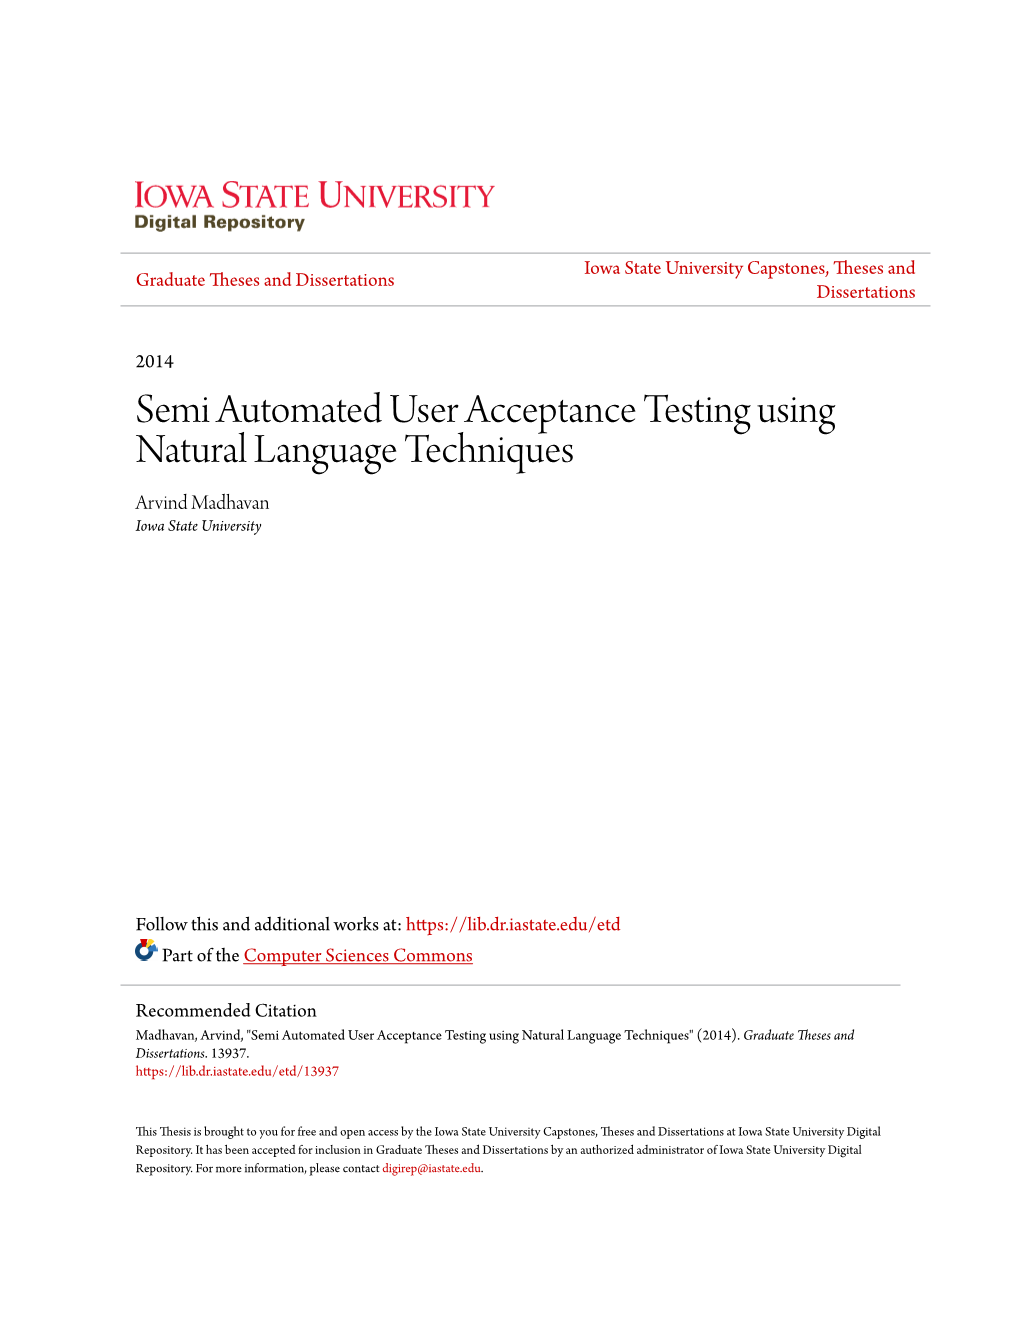 Semi Automated User Acceptance Testing Using Natural Language Techniques Arvind Madhavan Iowa State University